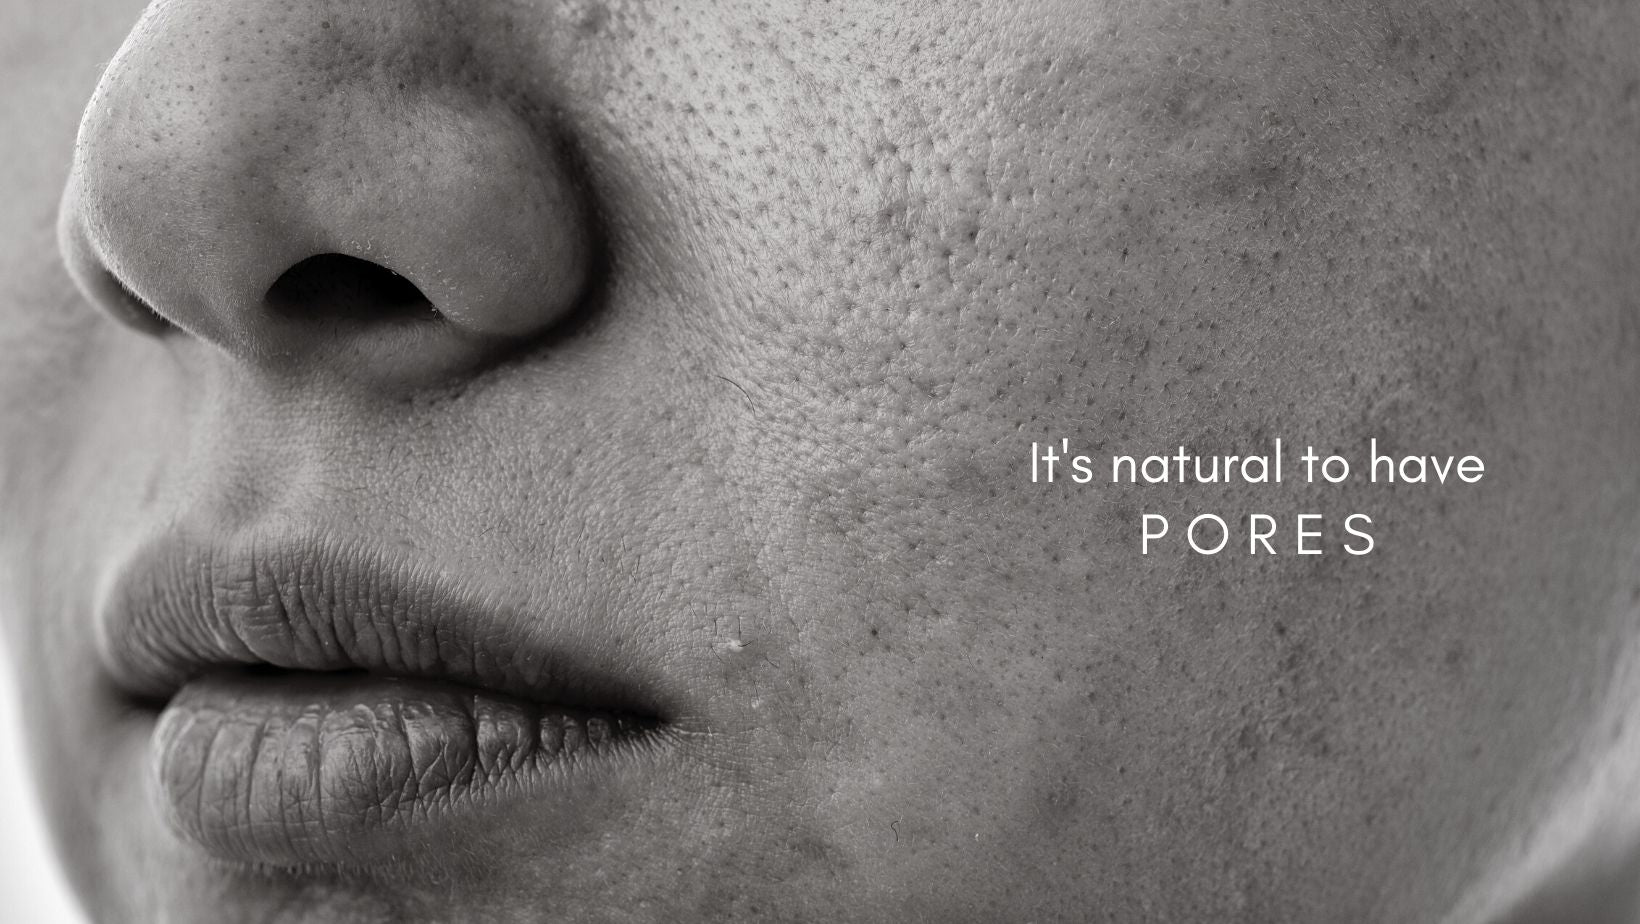 it is natural to have open pores - Myths and facts